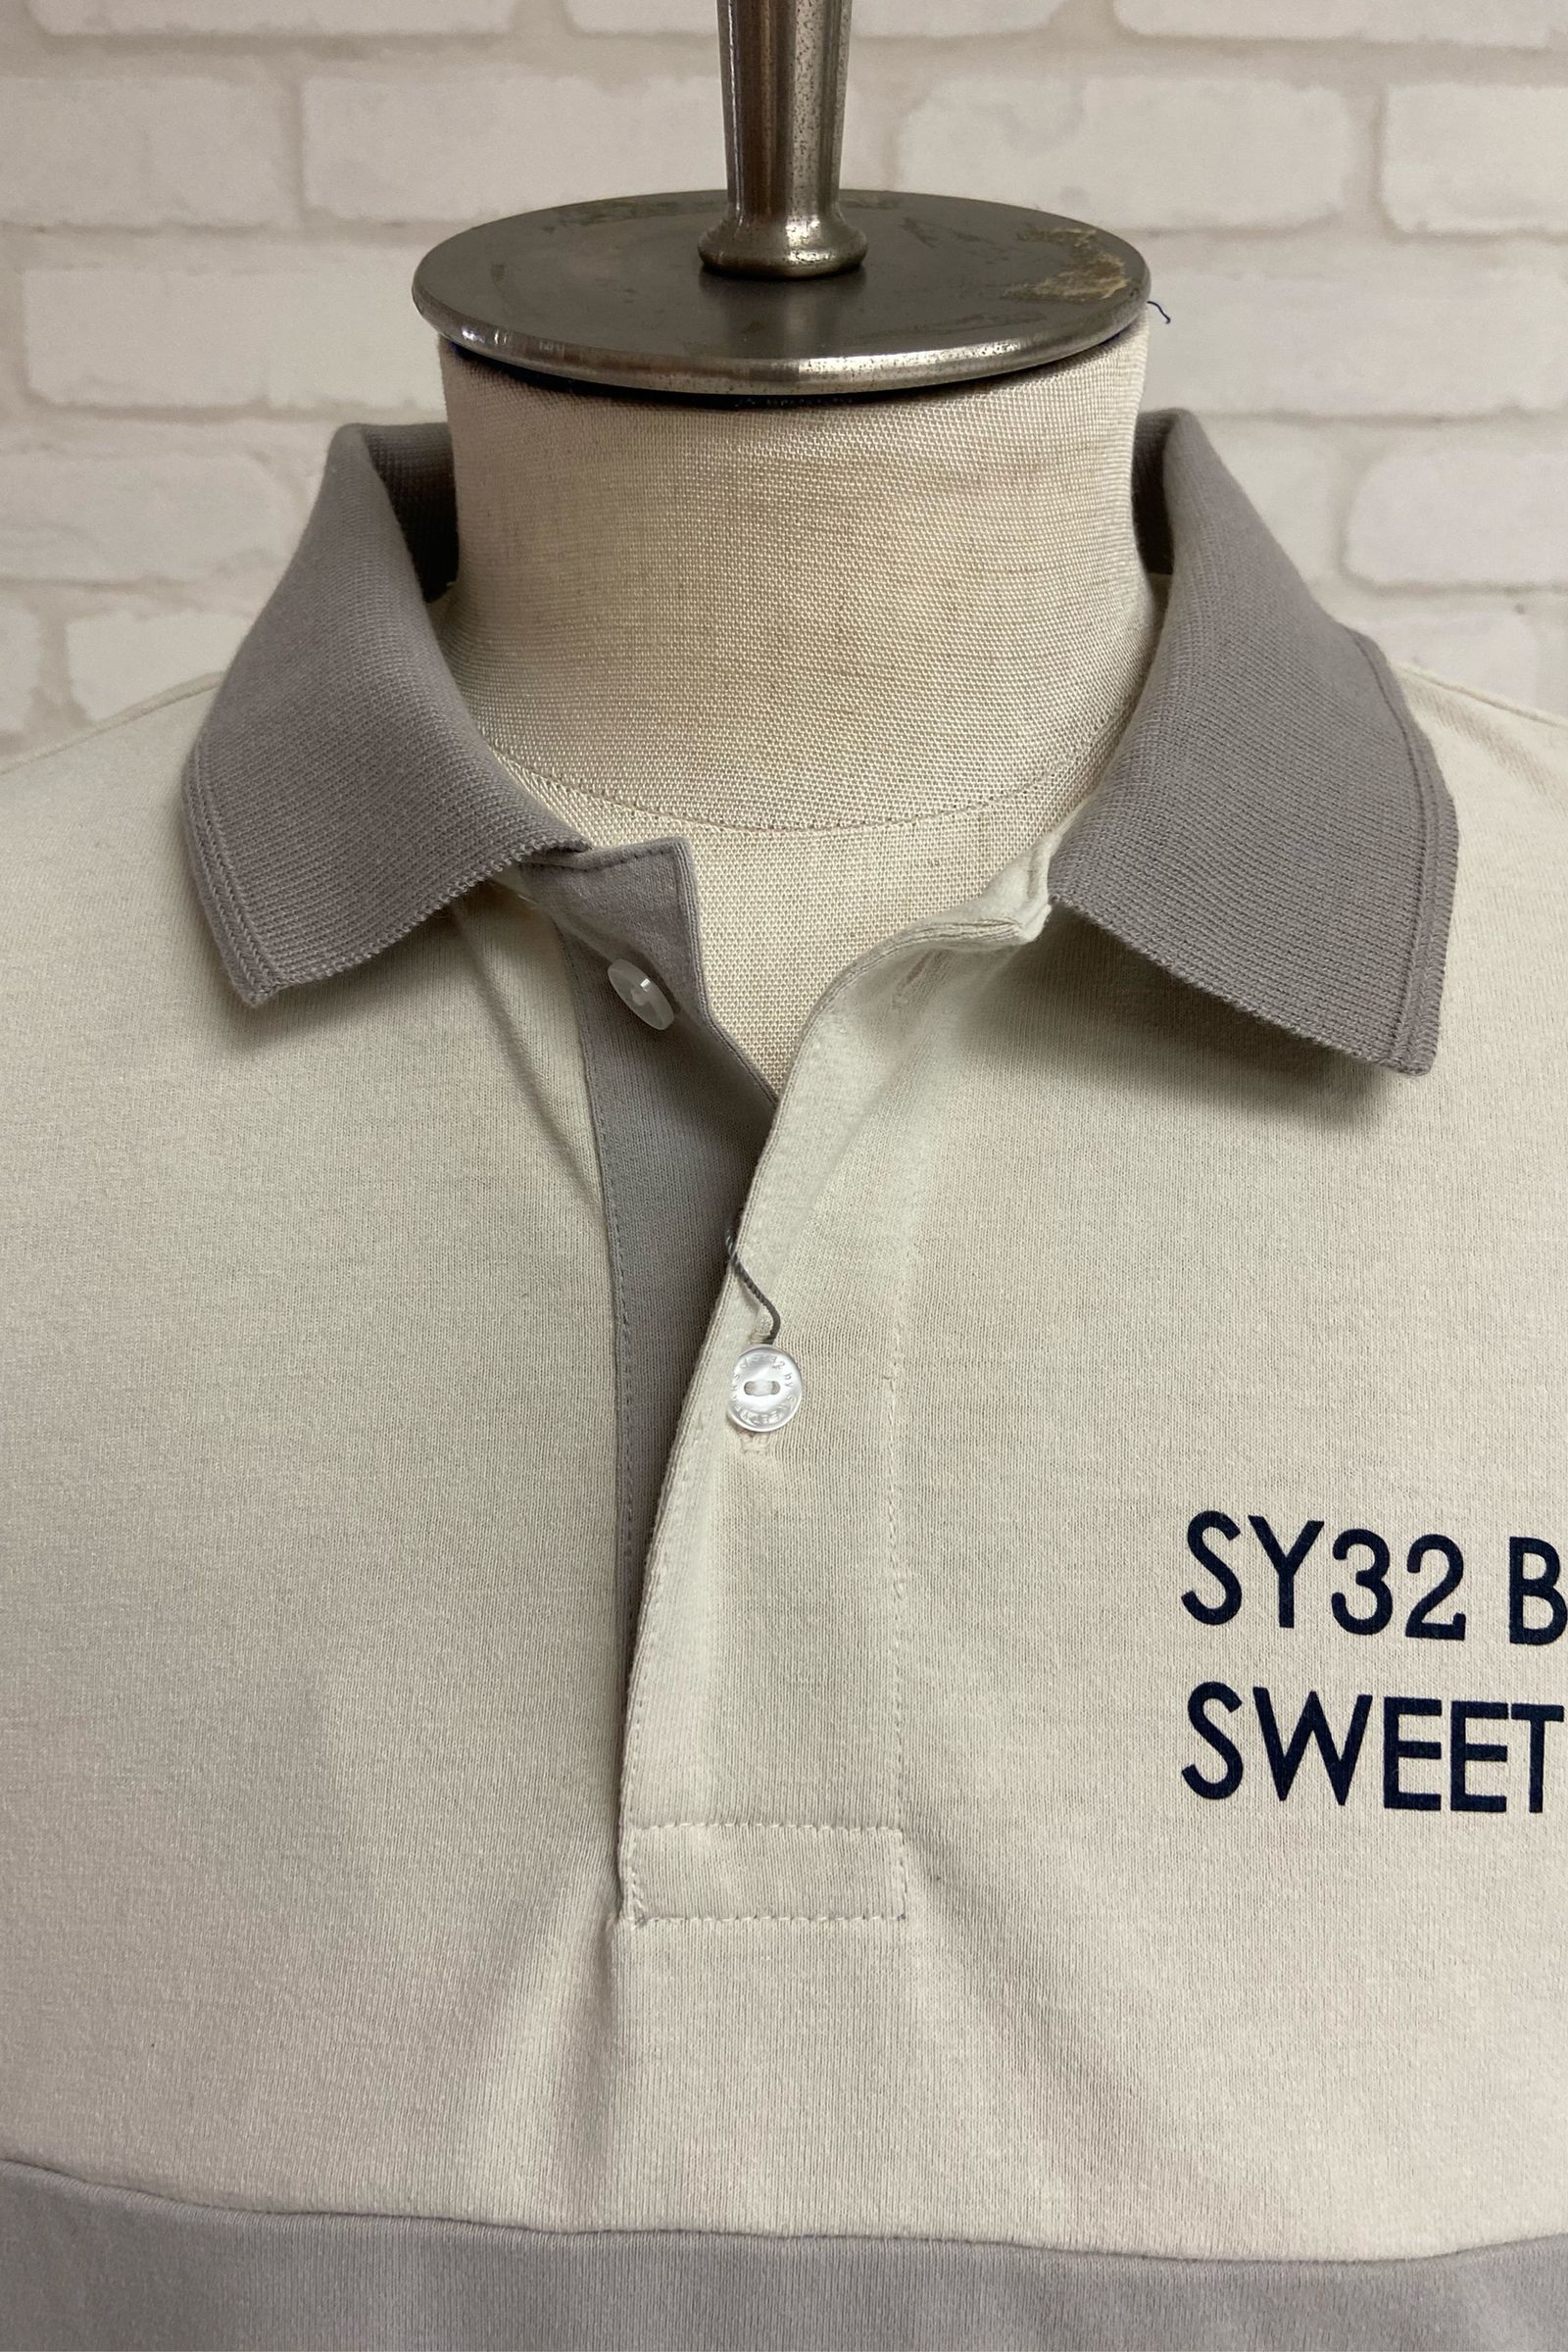 POLO SHIRTS 2 / GRAY×BEIGE 【SY32 by SWEET YEARS】 - S